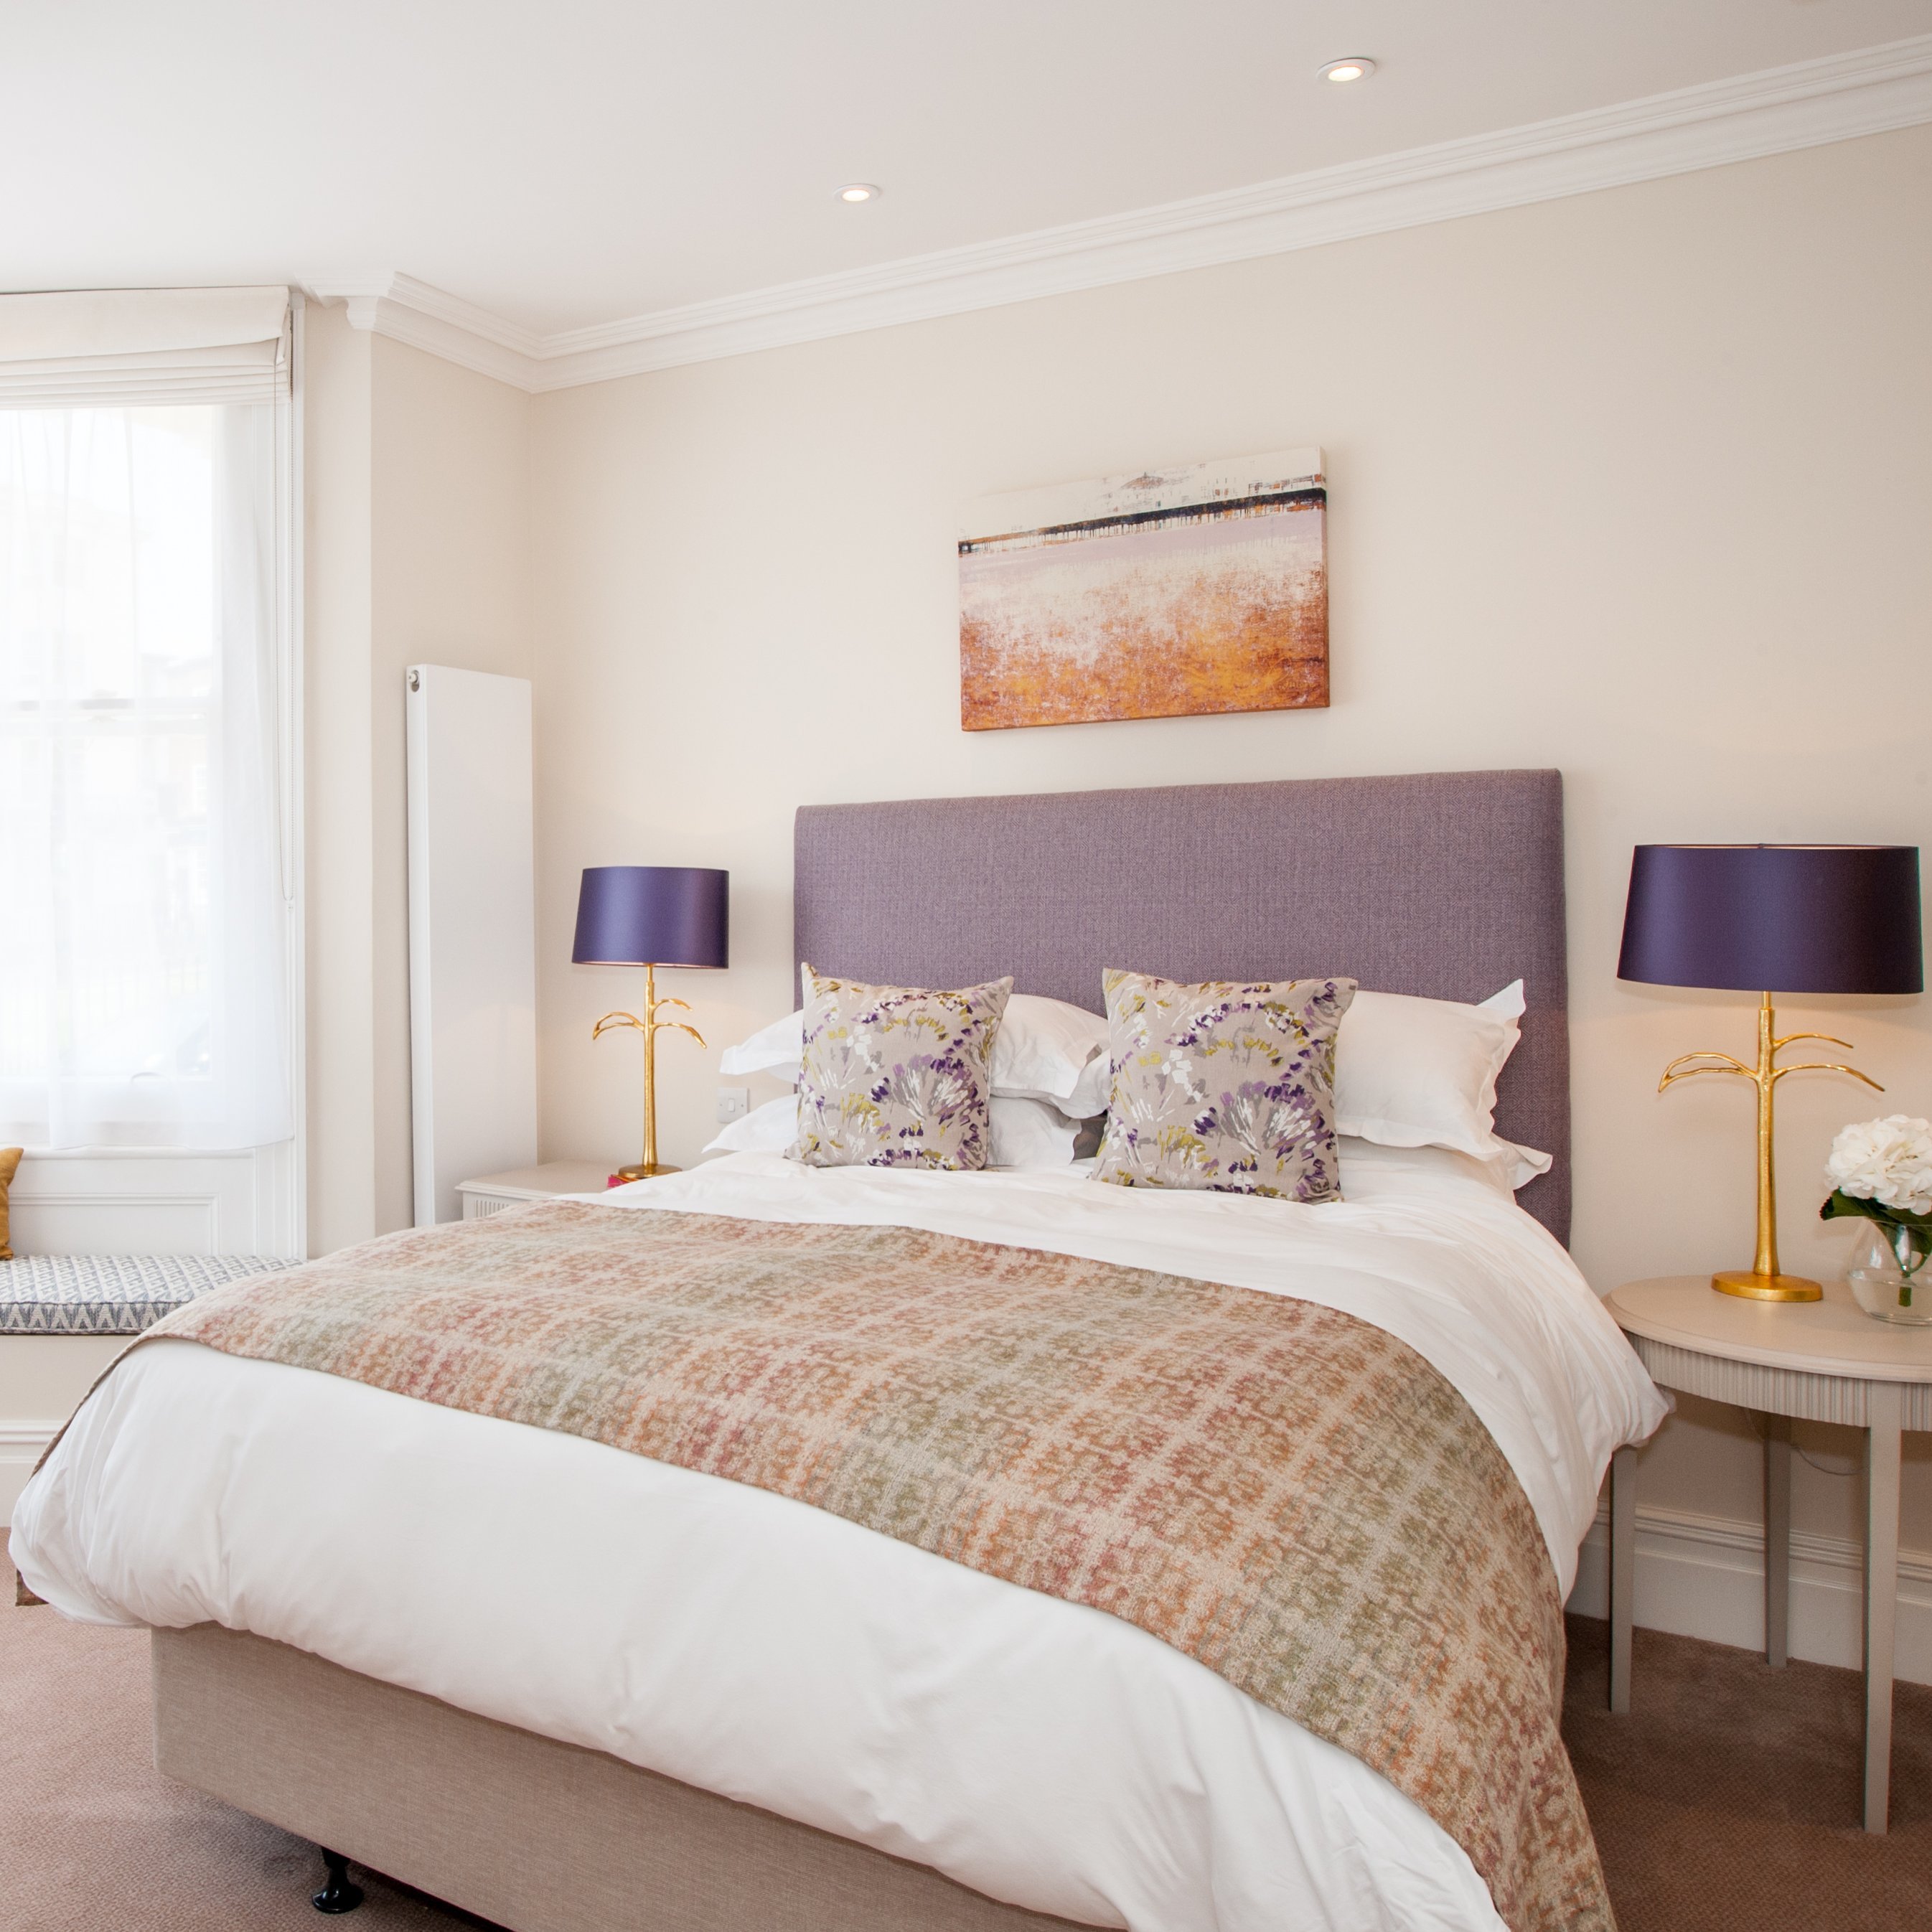 The Charm Hotel & Spa is a gorgeous boutique hotel in central Brighton close to the beach and The Laines